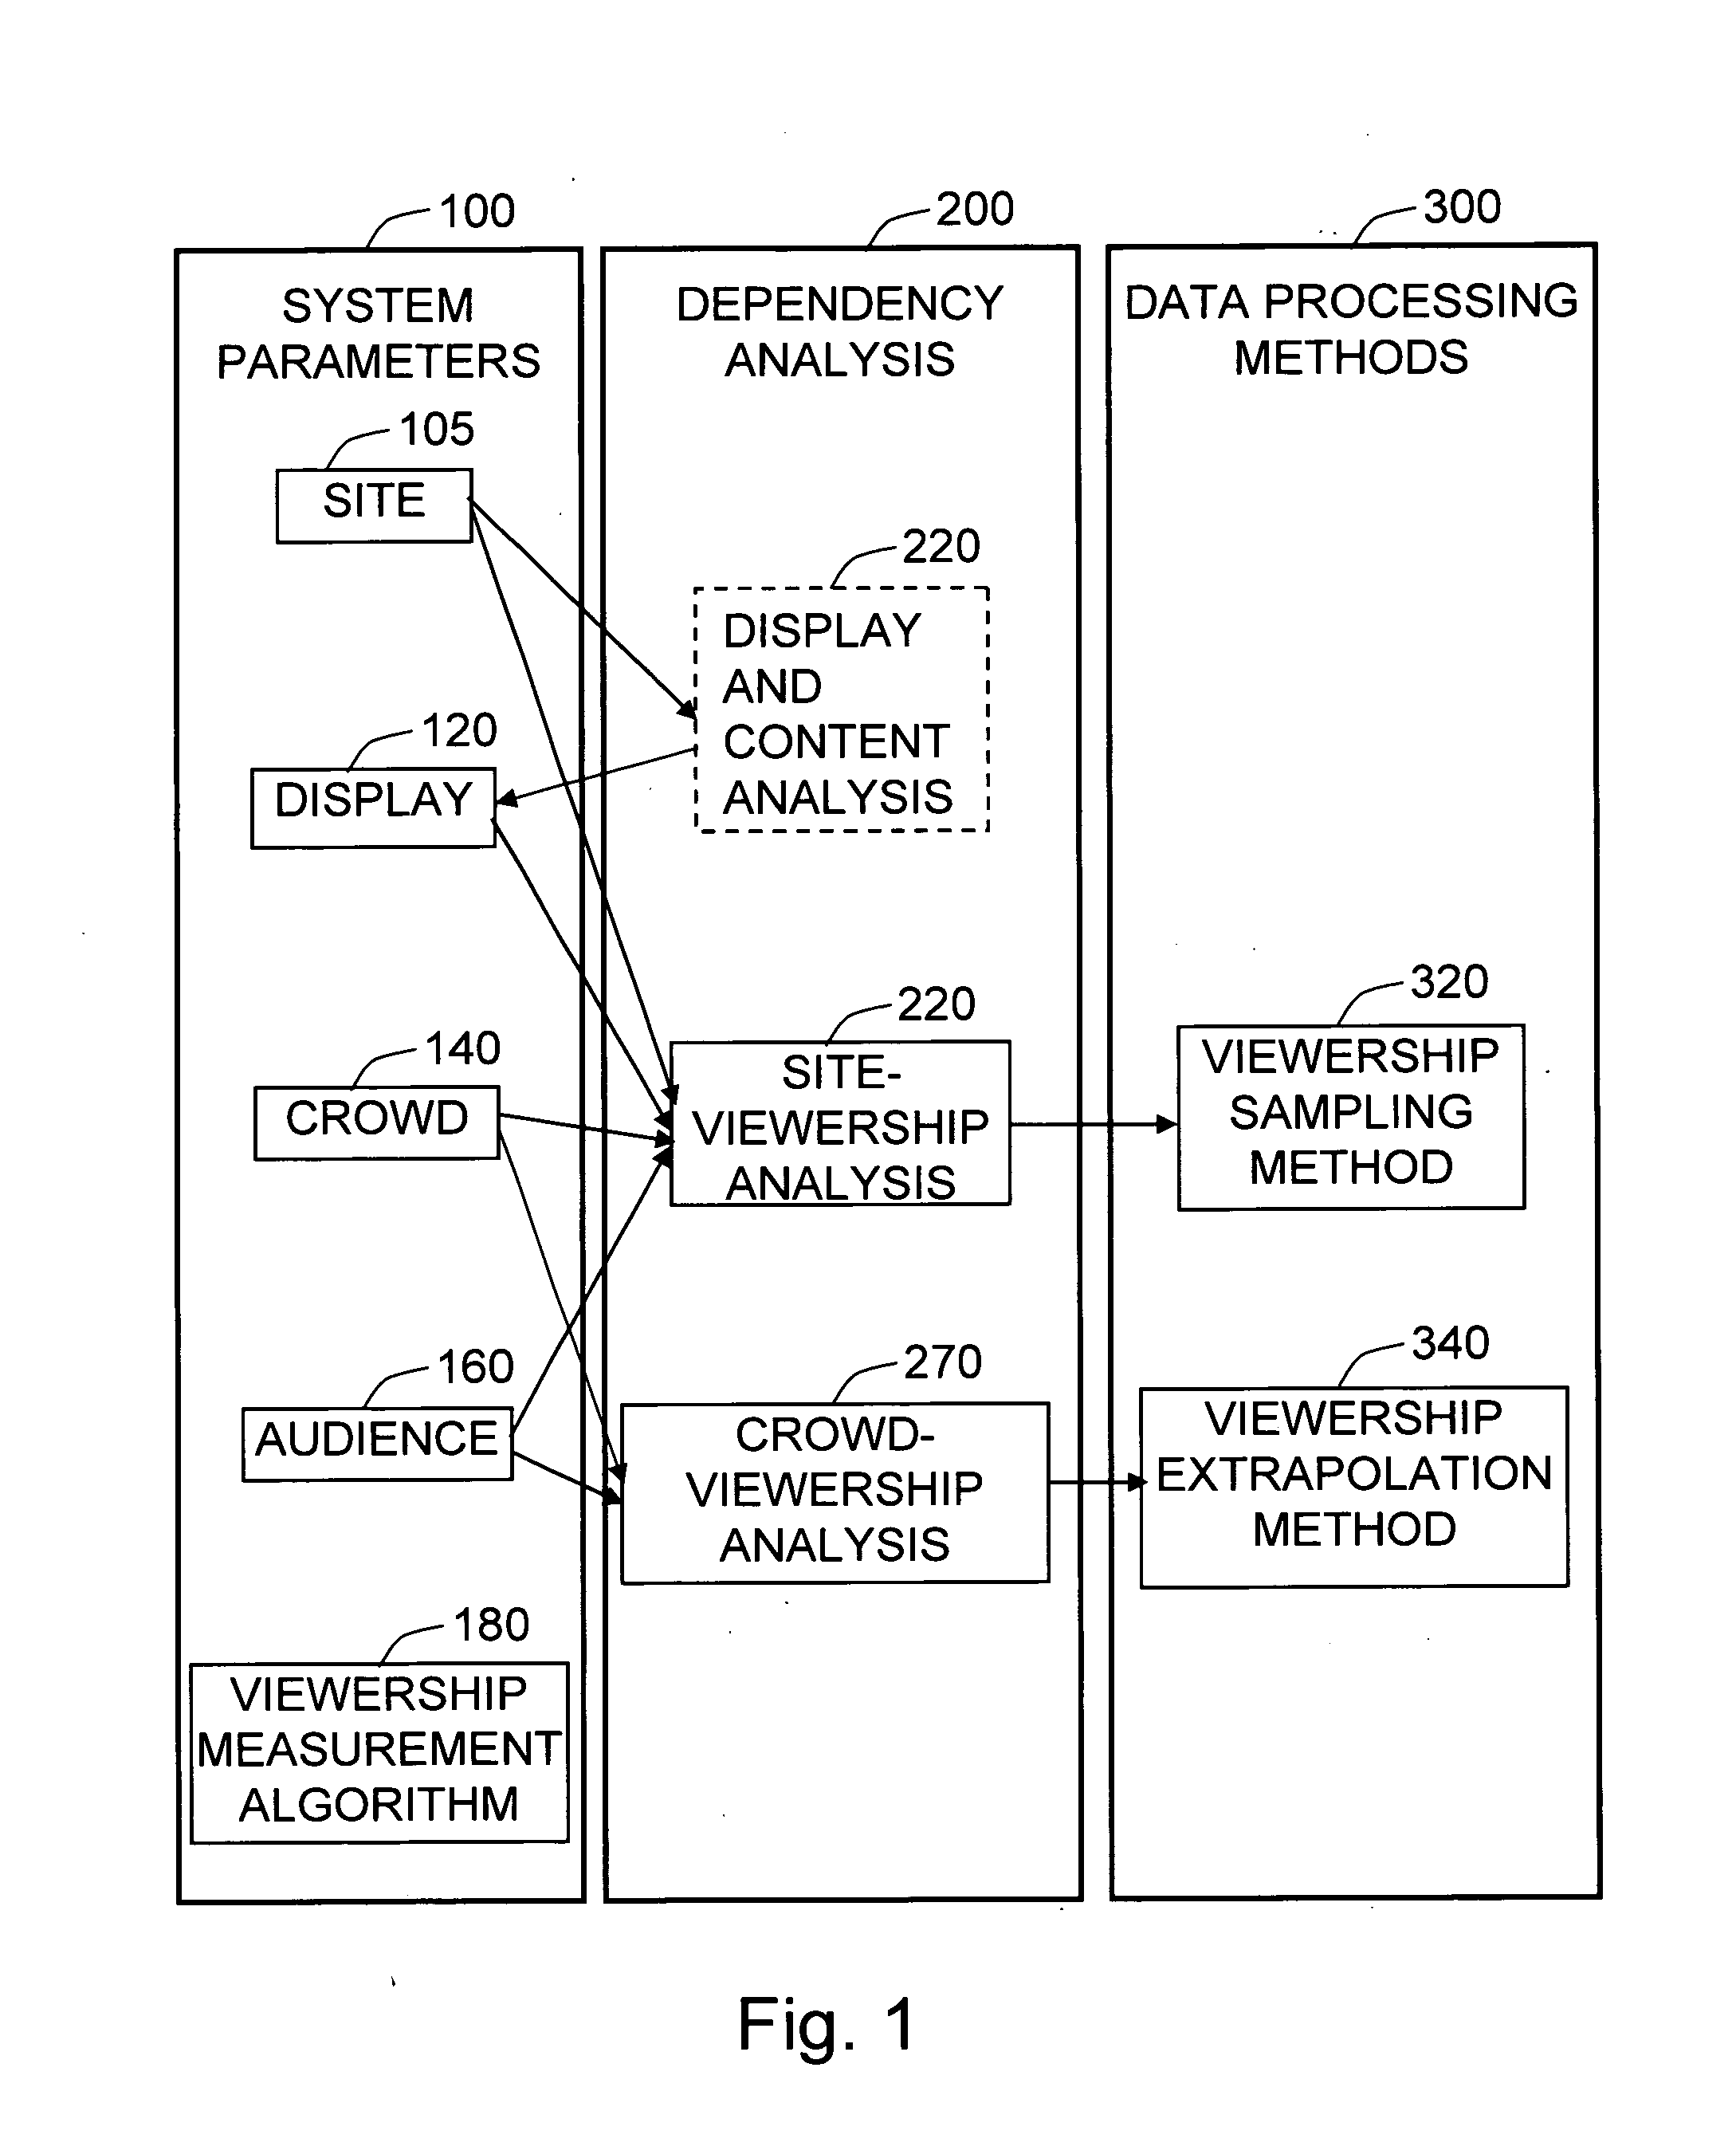 Method and system for media audience measurement and spatial extrapolation based on site, display, crowd, and viewership characterization